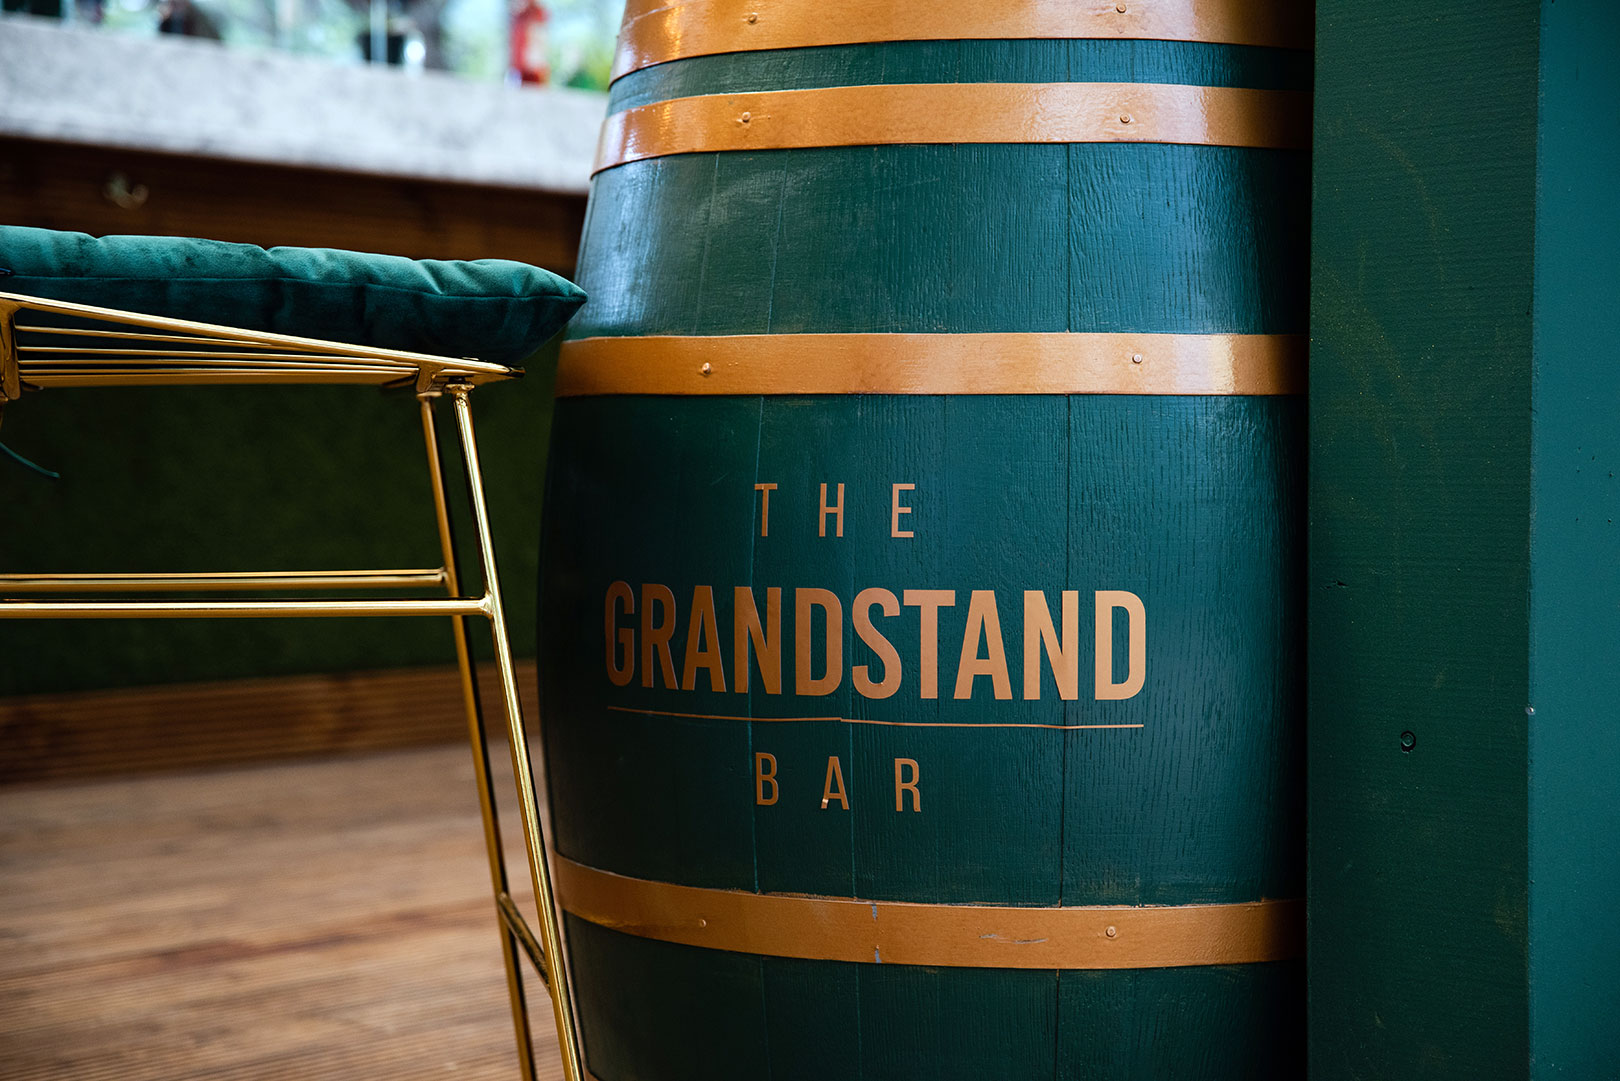 The Grandstand Bar